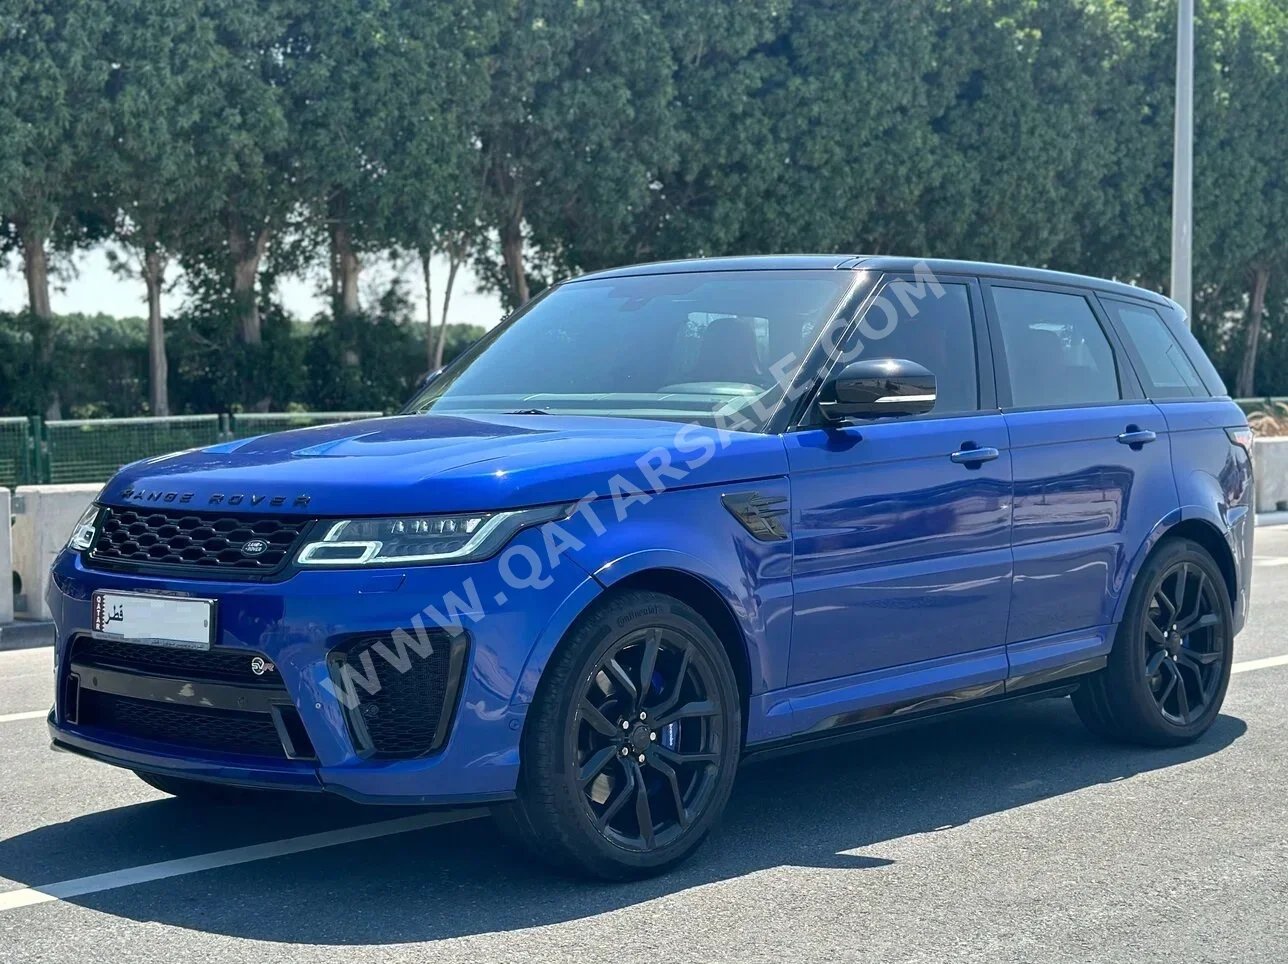 Land Rover  Range Rover  Sport SVR  2015  Automatic  89,000 Km  8 Cylinder  Four Wheel Drive (4WD)  SUV  Blue